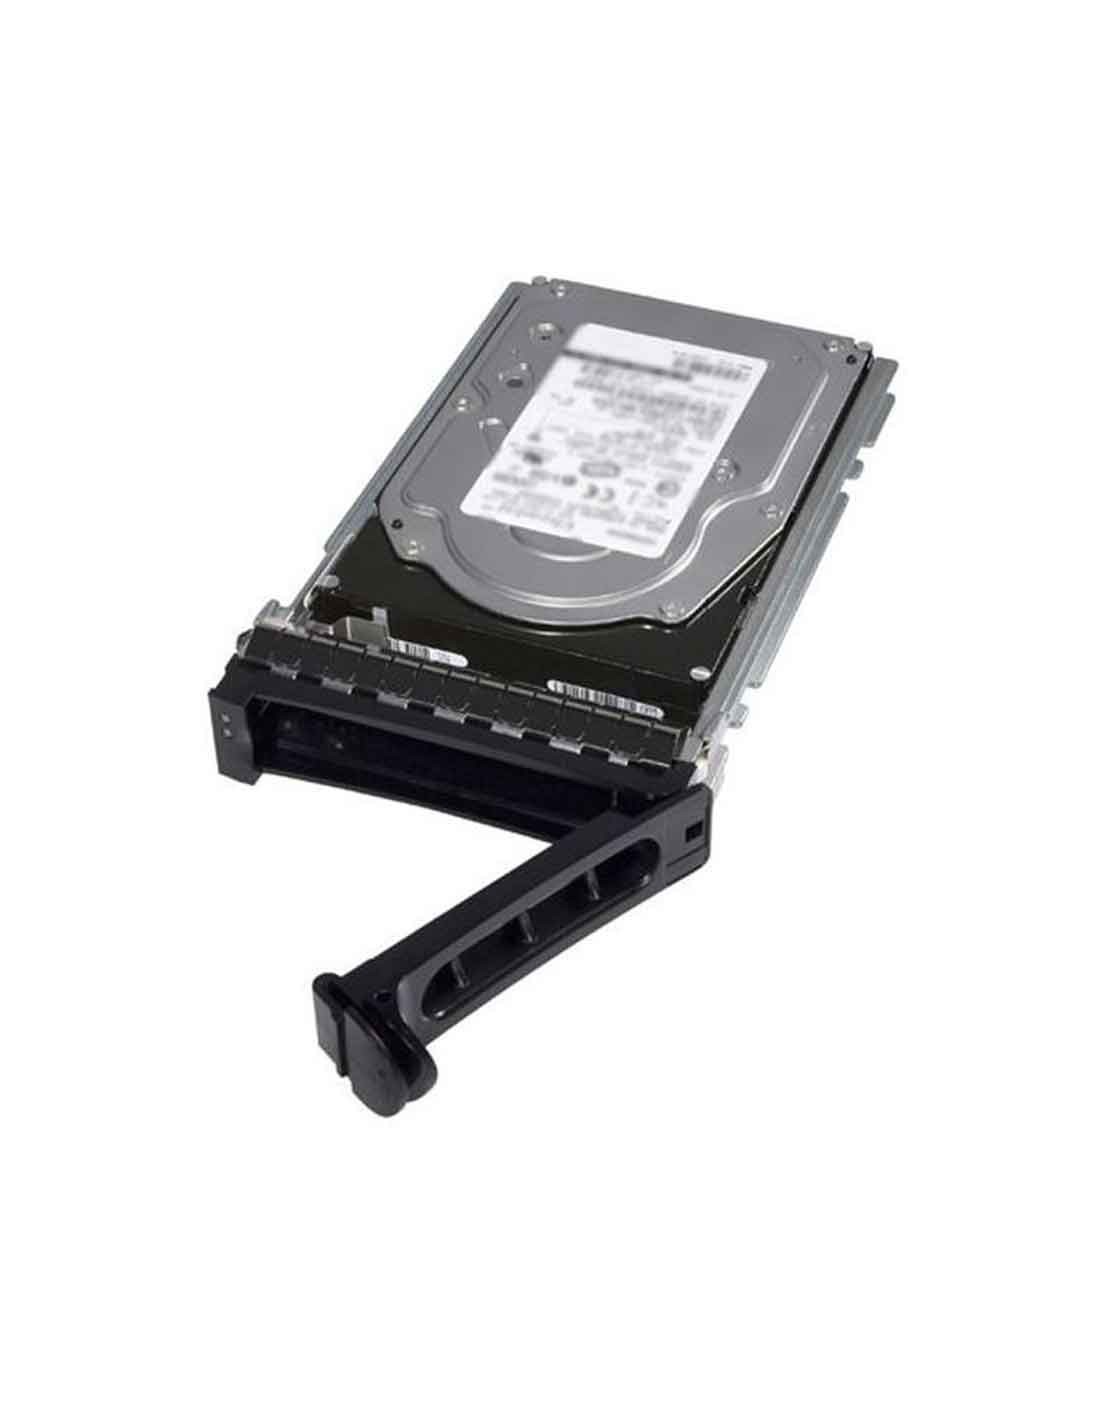 Dell 500GB 7.2K RPM NL-SAS 2.5in Hot-plug Hard Drive at a cheap price and fast free delivery in Dubai yaddas karti